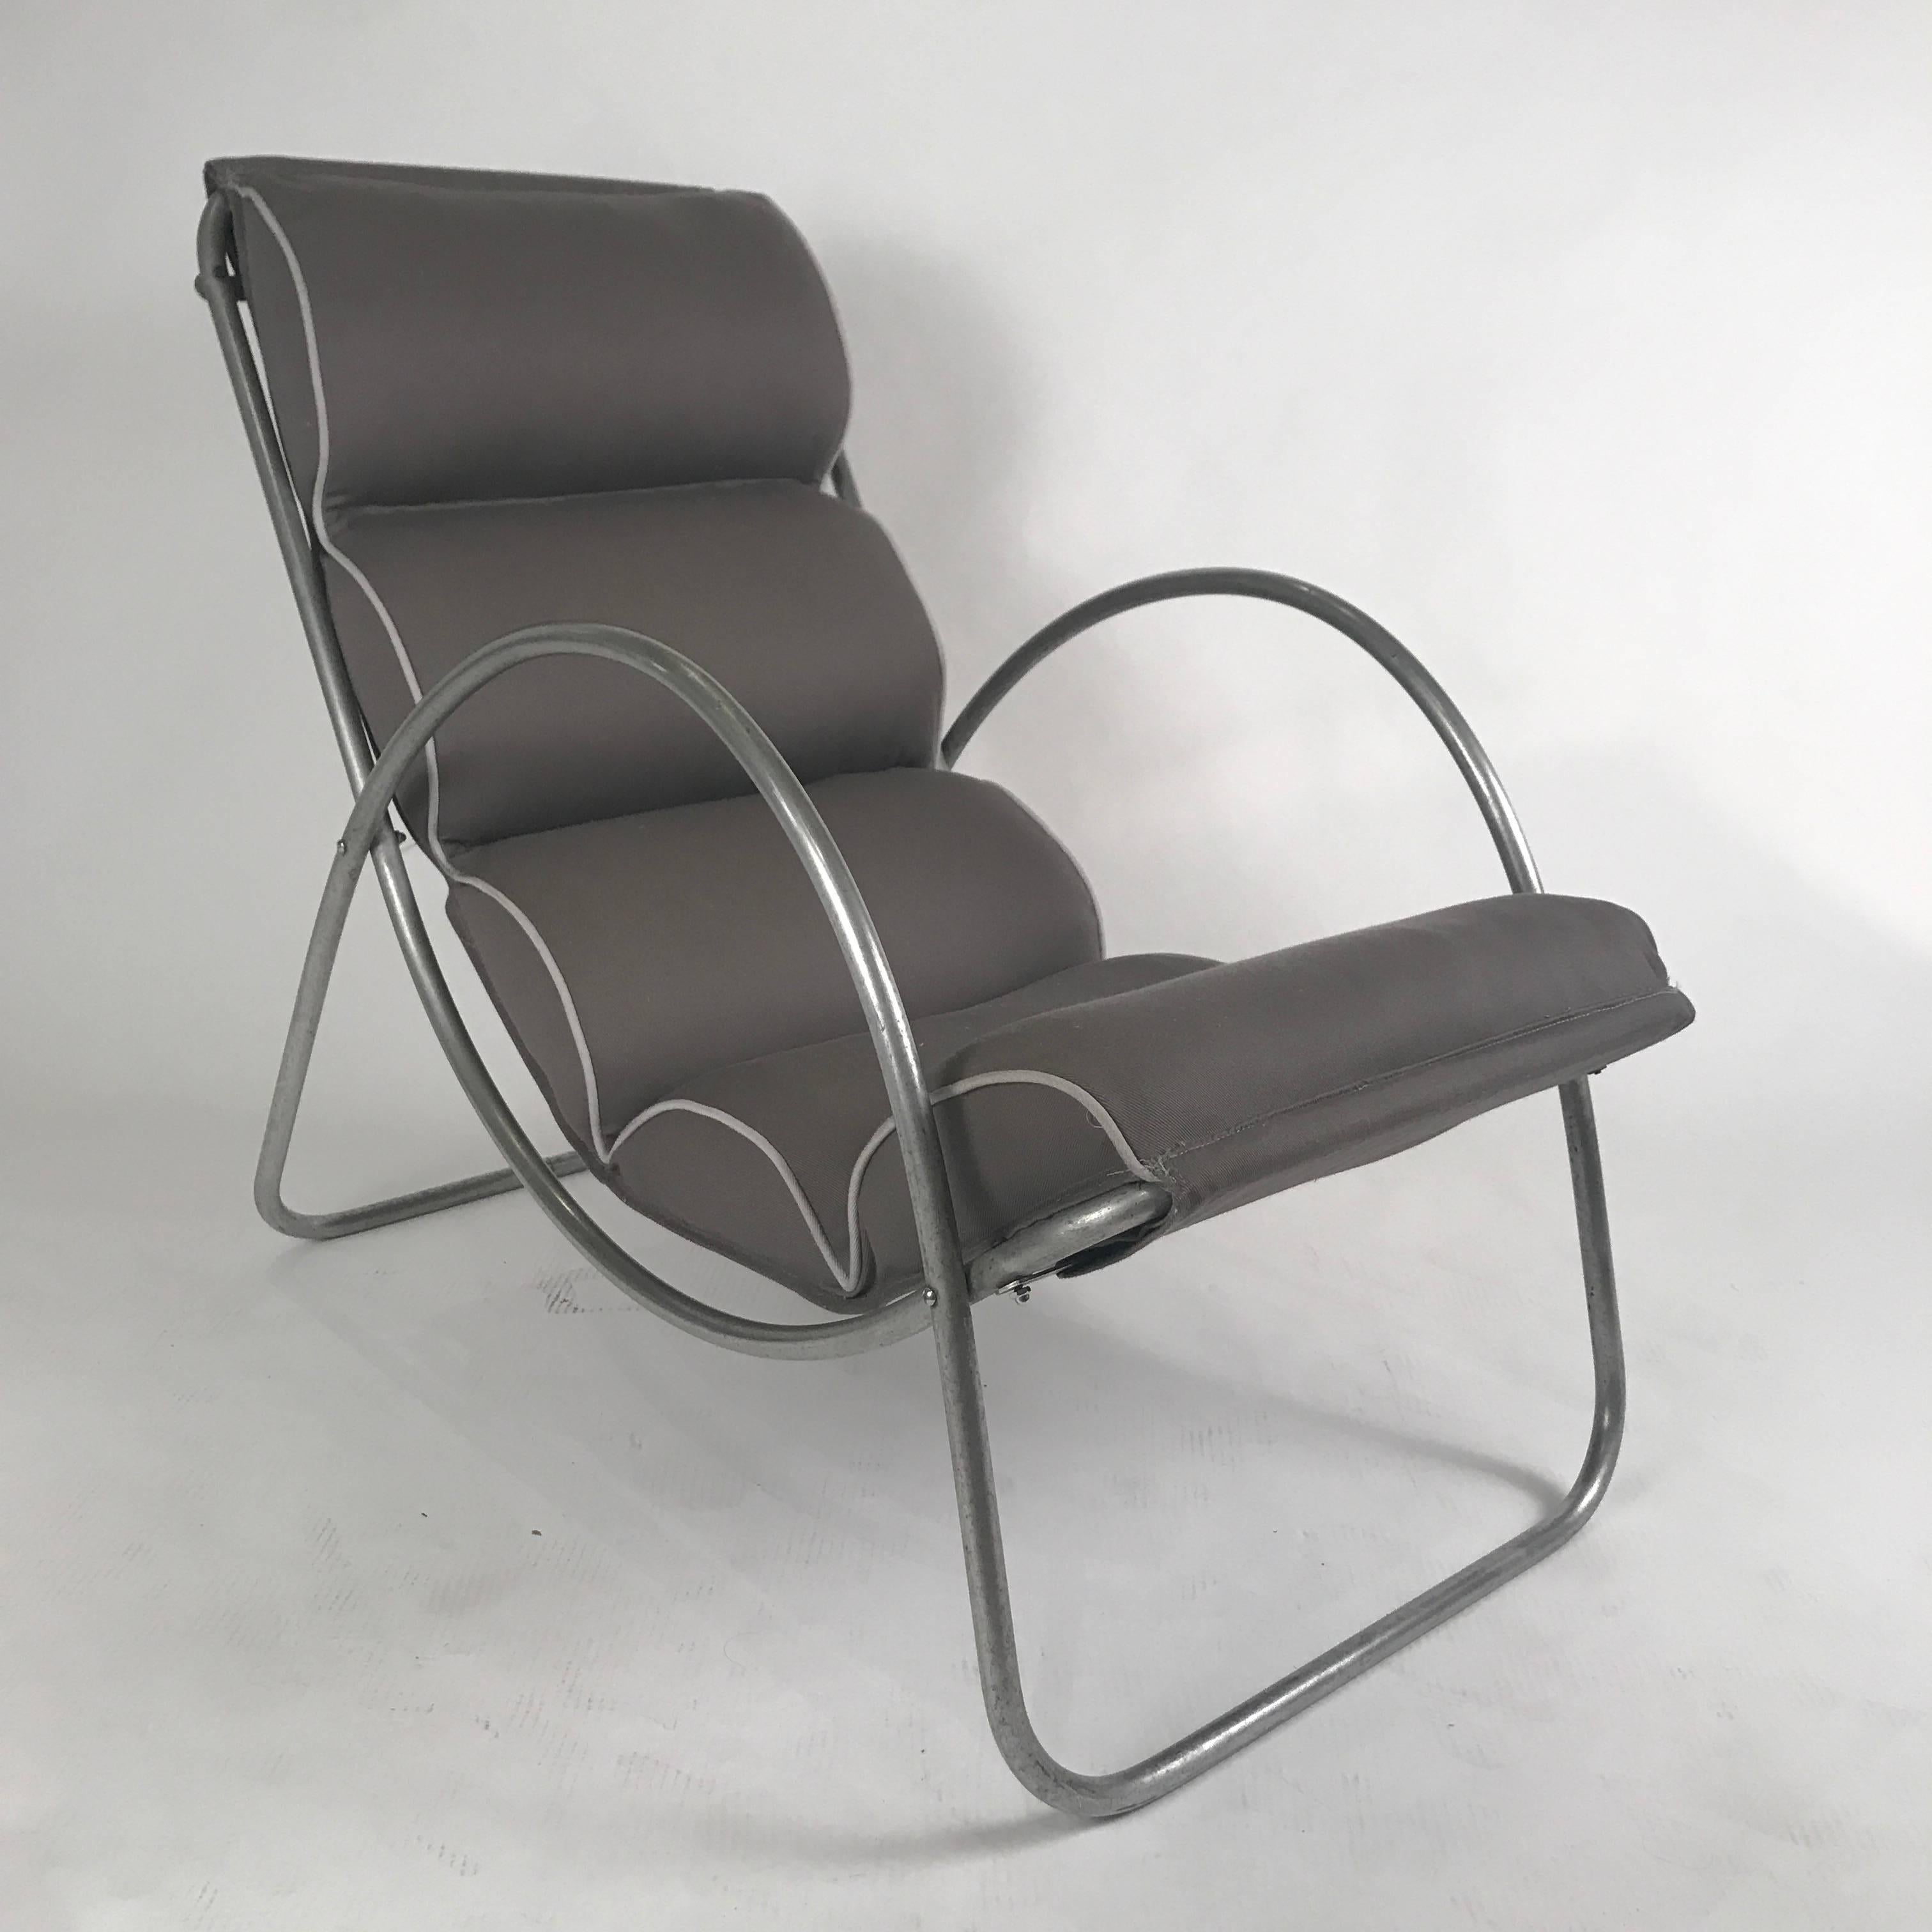 Pair of Halliburton Lounge Chairs, 1930s Art Deco Machine Age Modernist Design In Good Condition In Hudson, NY